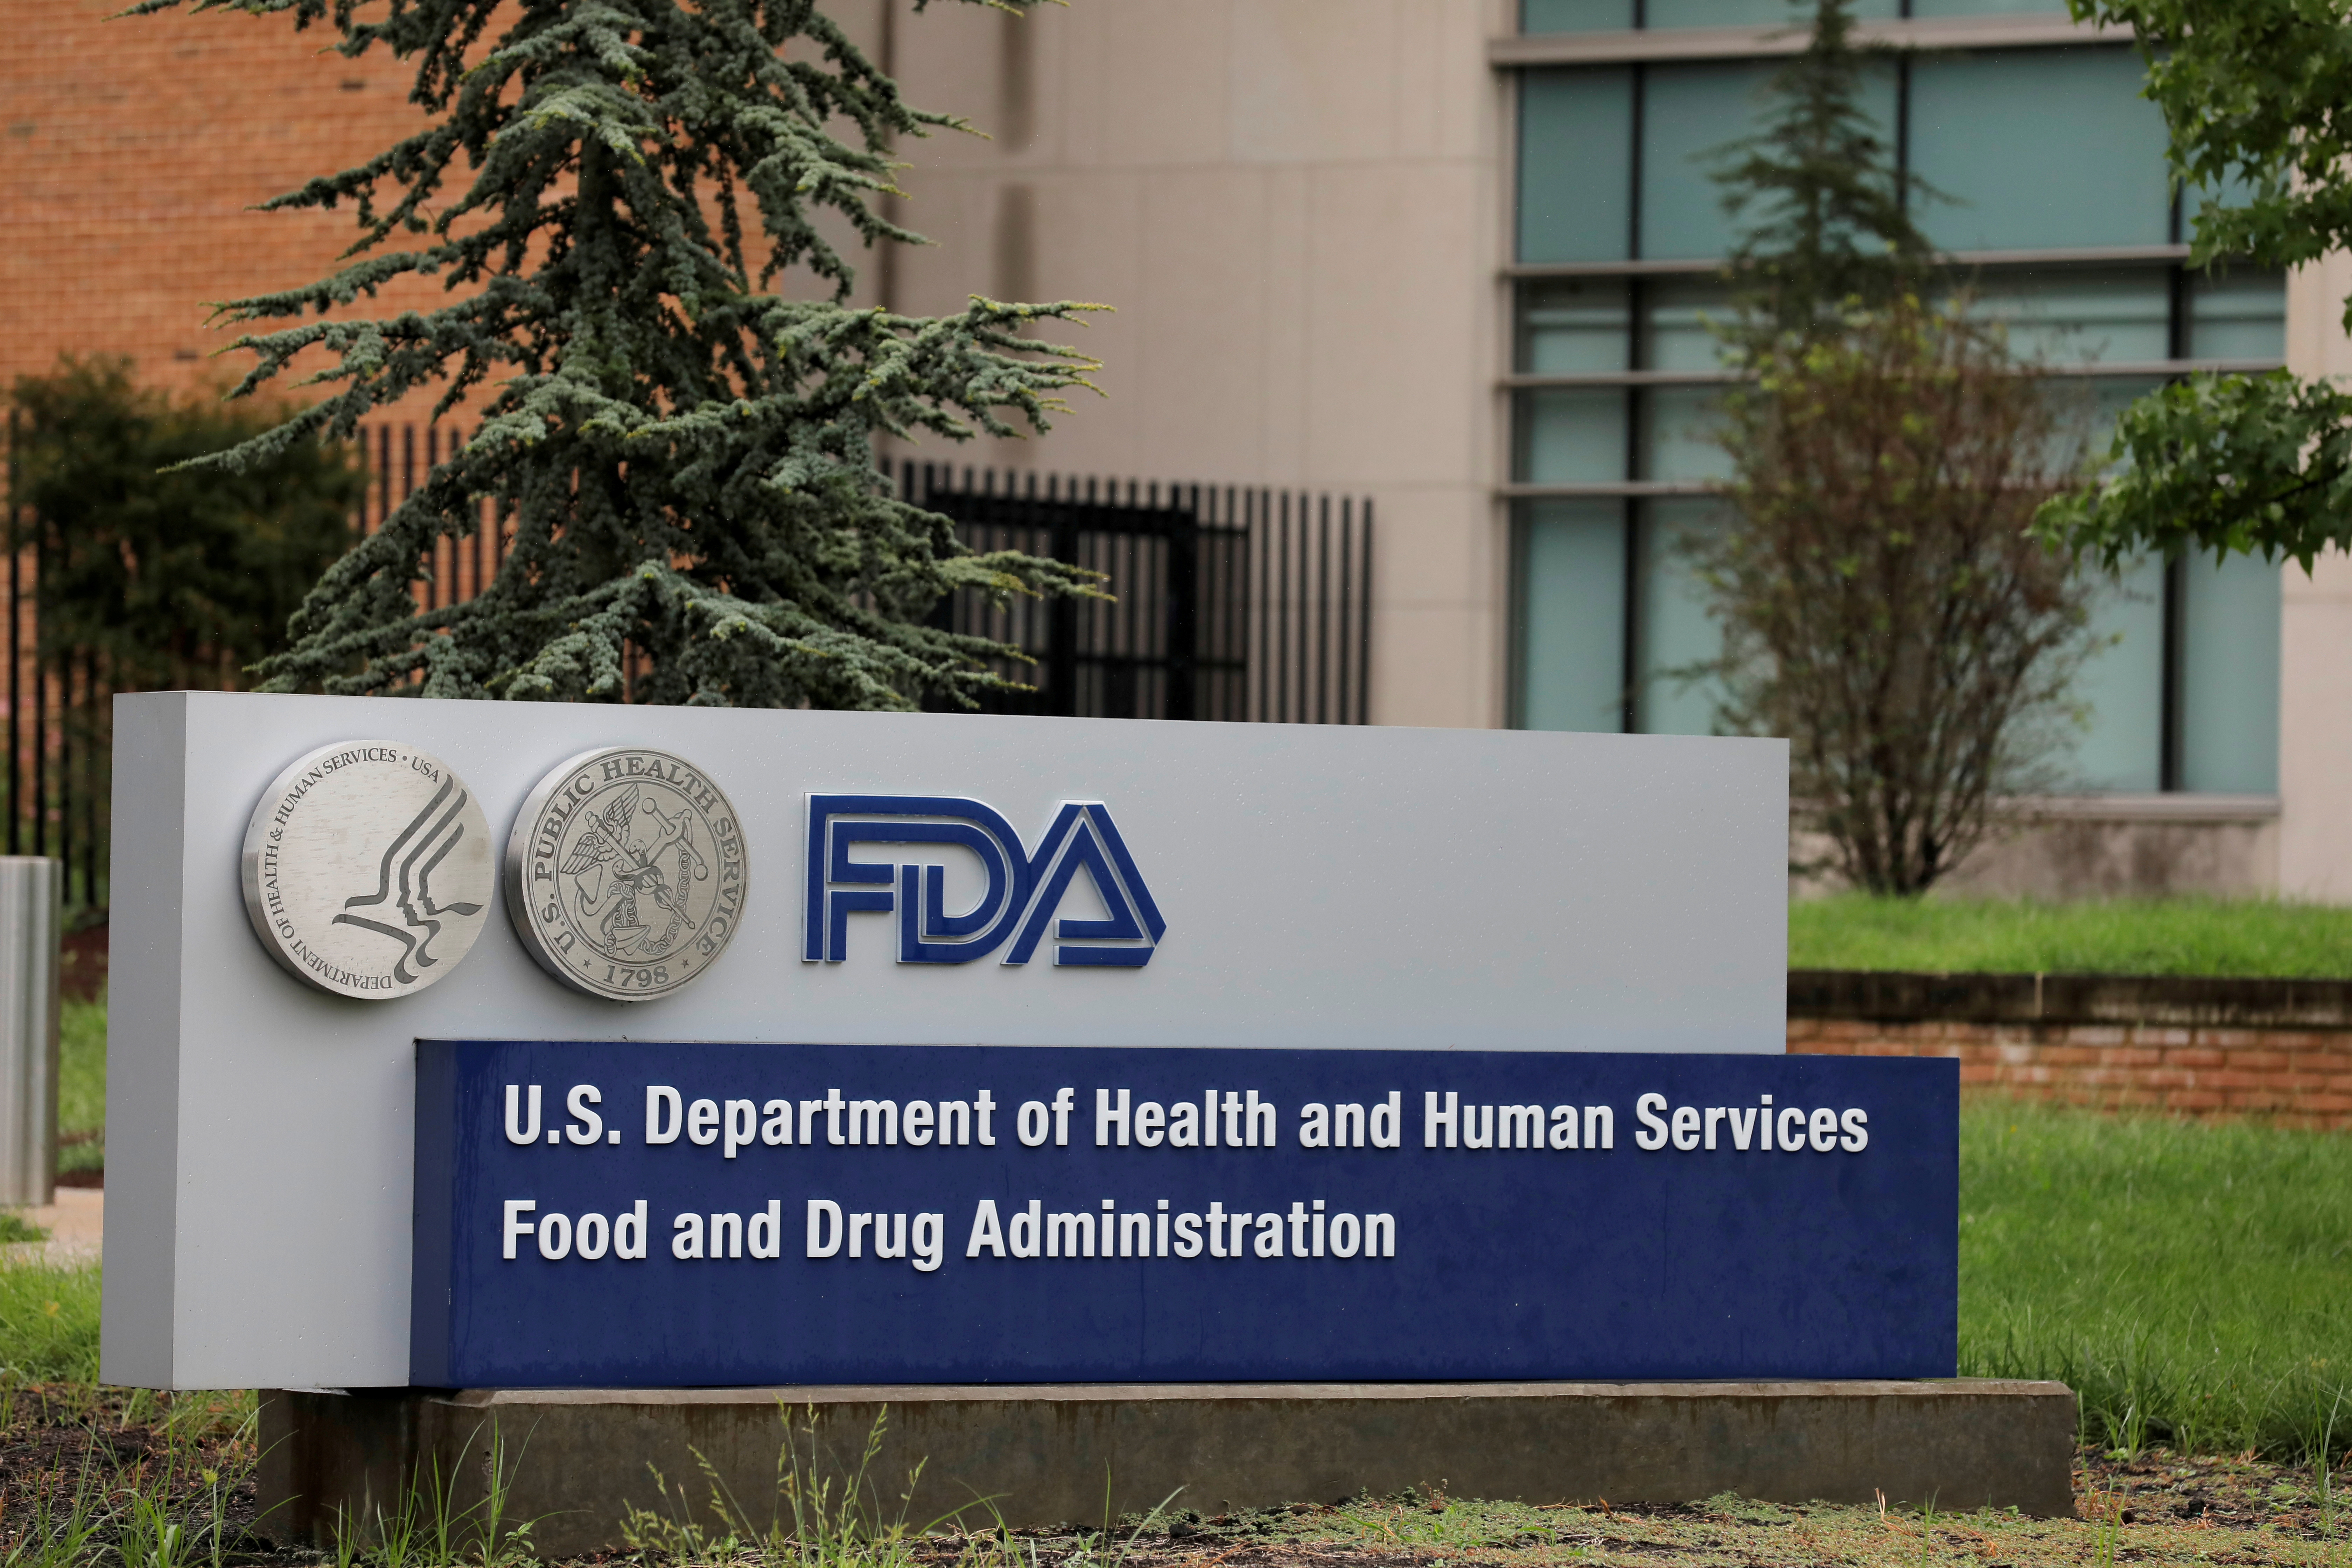 The Food and Drug Administration (FDA) headquarters in White Oak, Maryland, August 29, 2020. REUTERS/Andrew Kelly